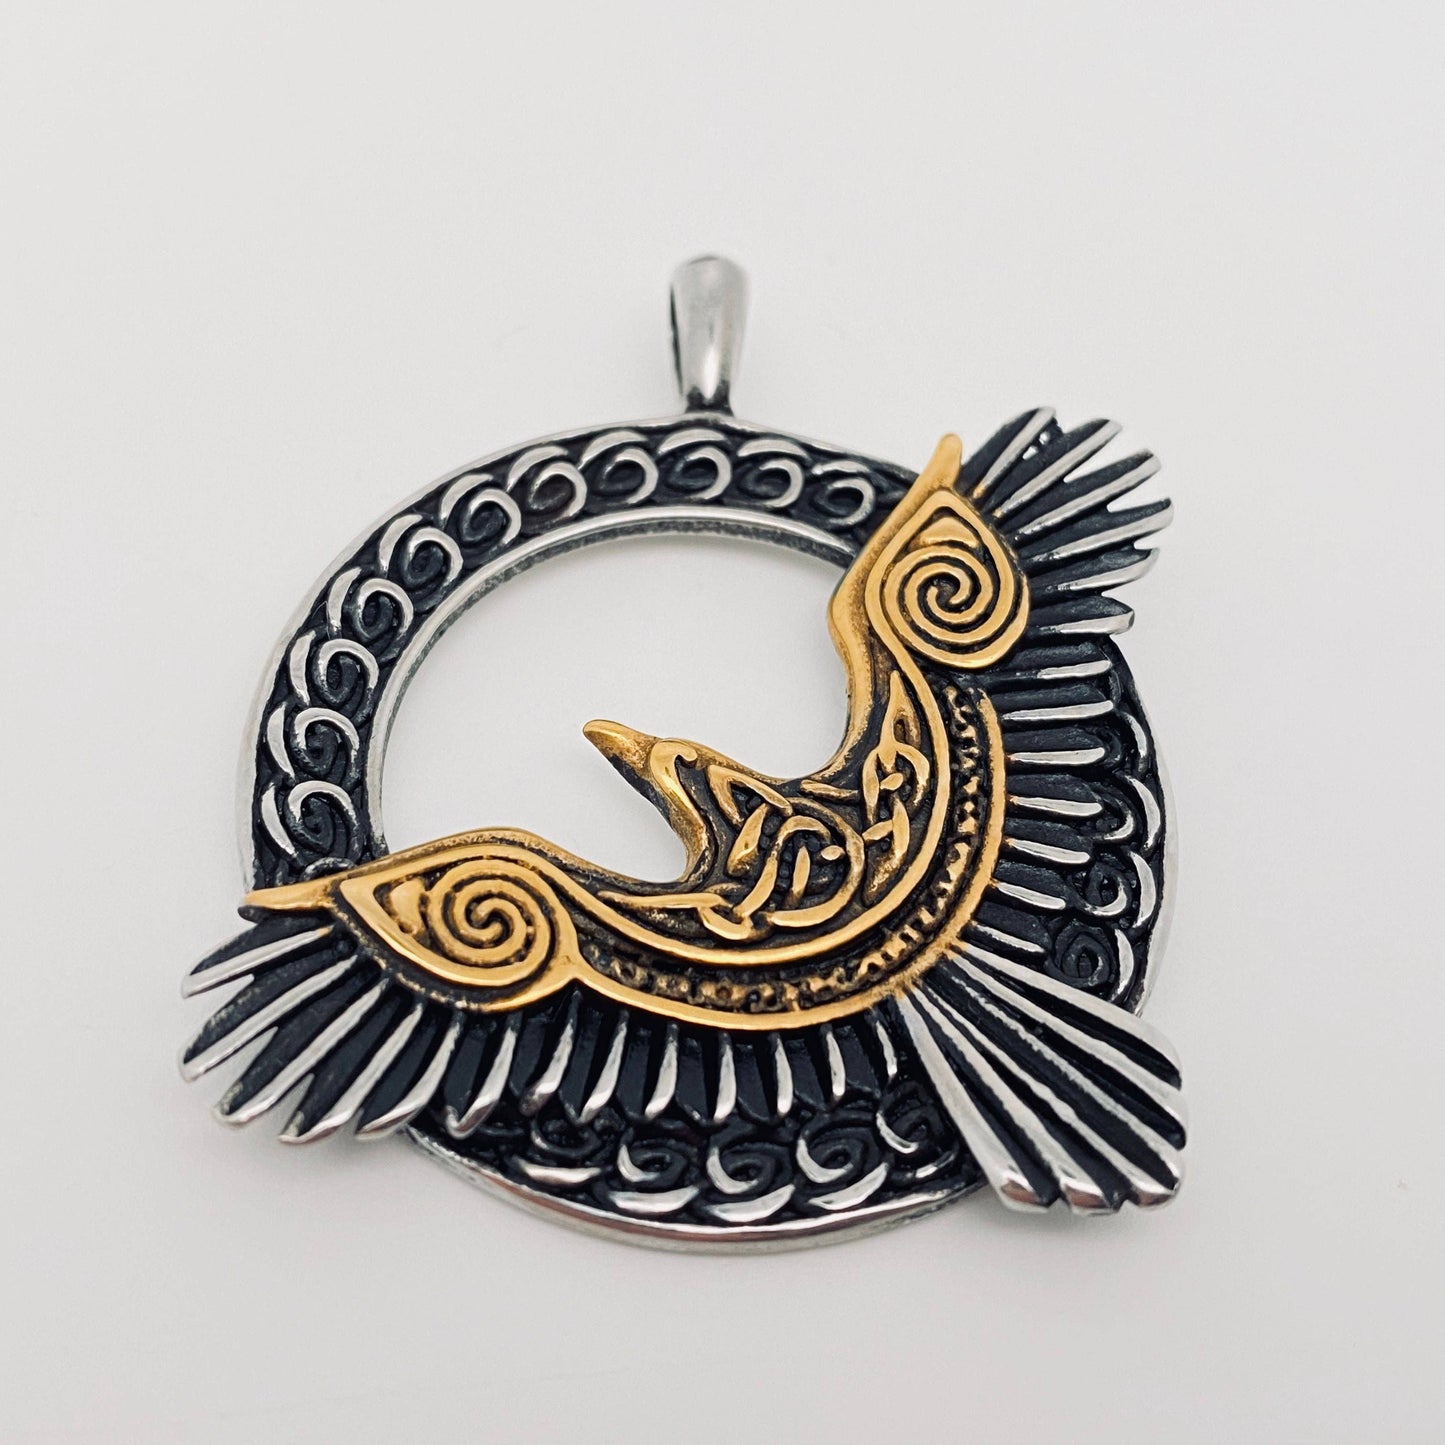 Viking Crow Pendant with Spiral Accents